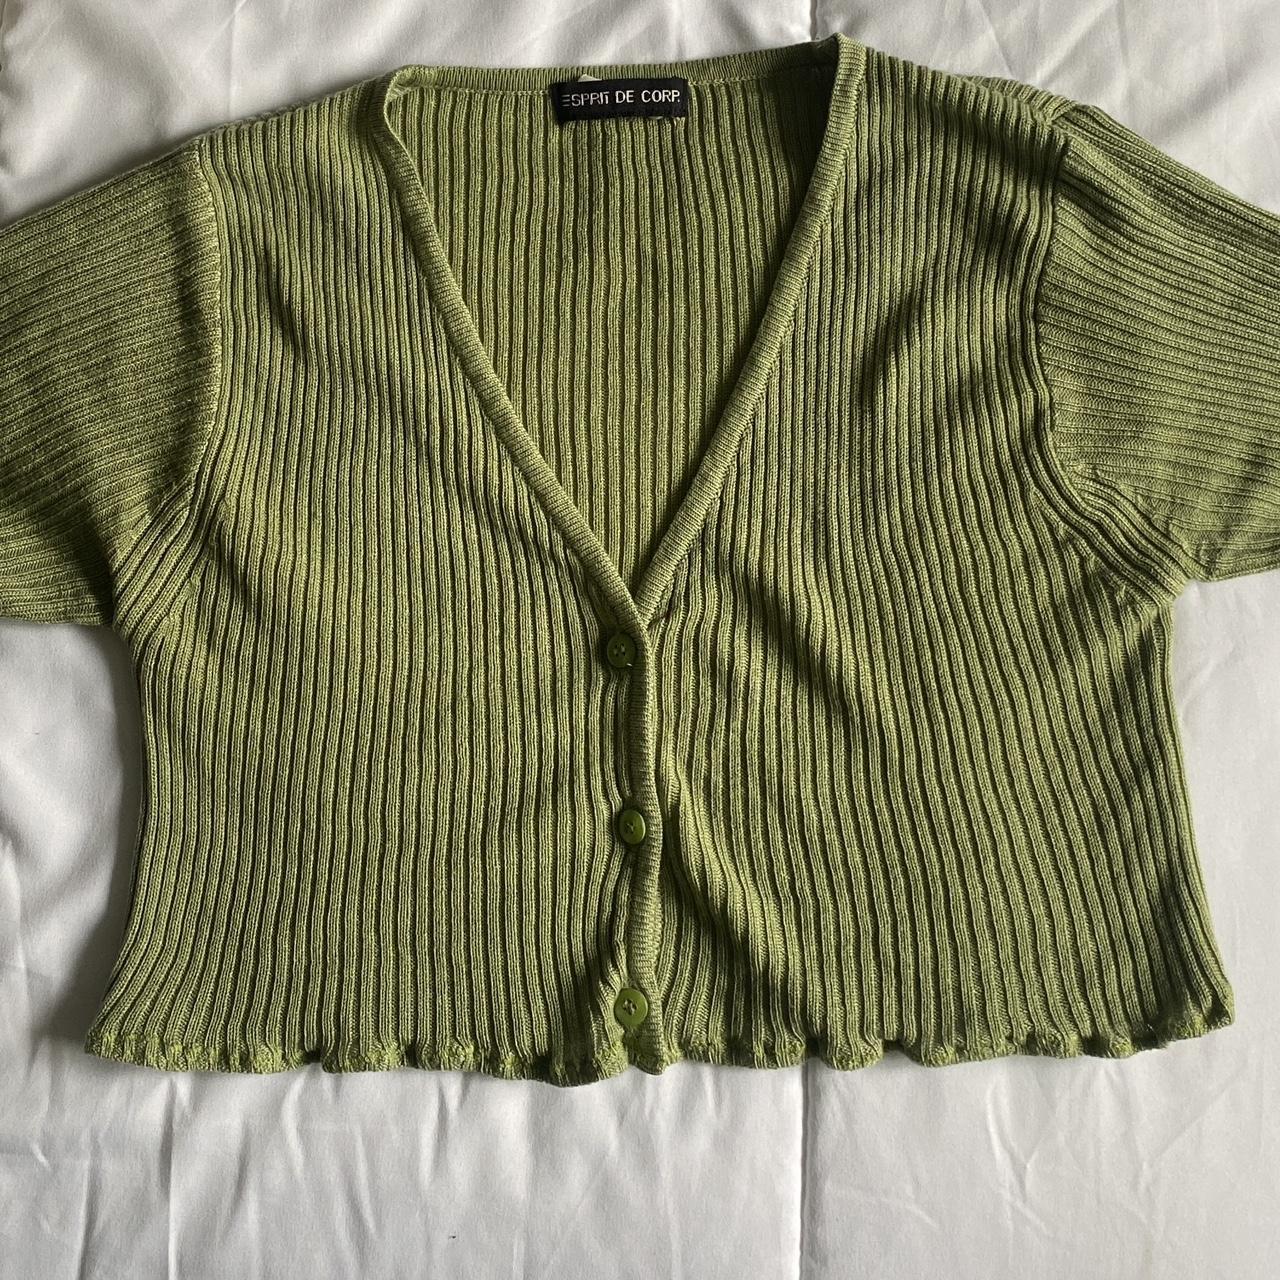 Small green button crop top! super soft and stretchy... - Depop